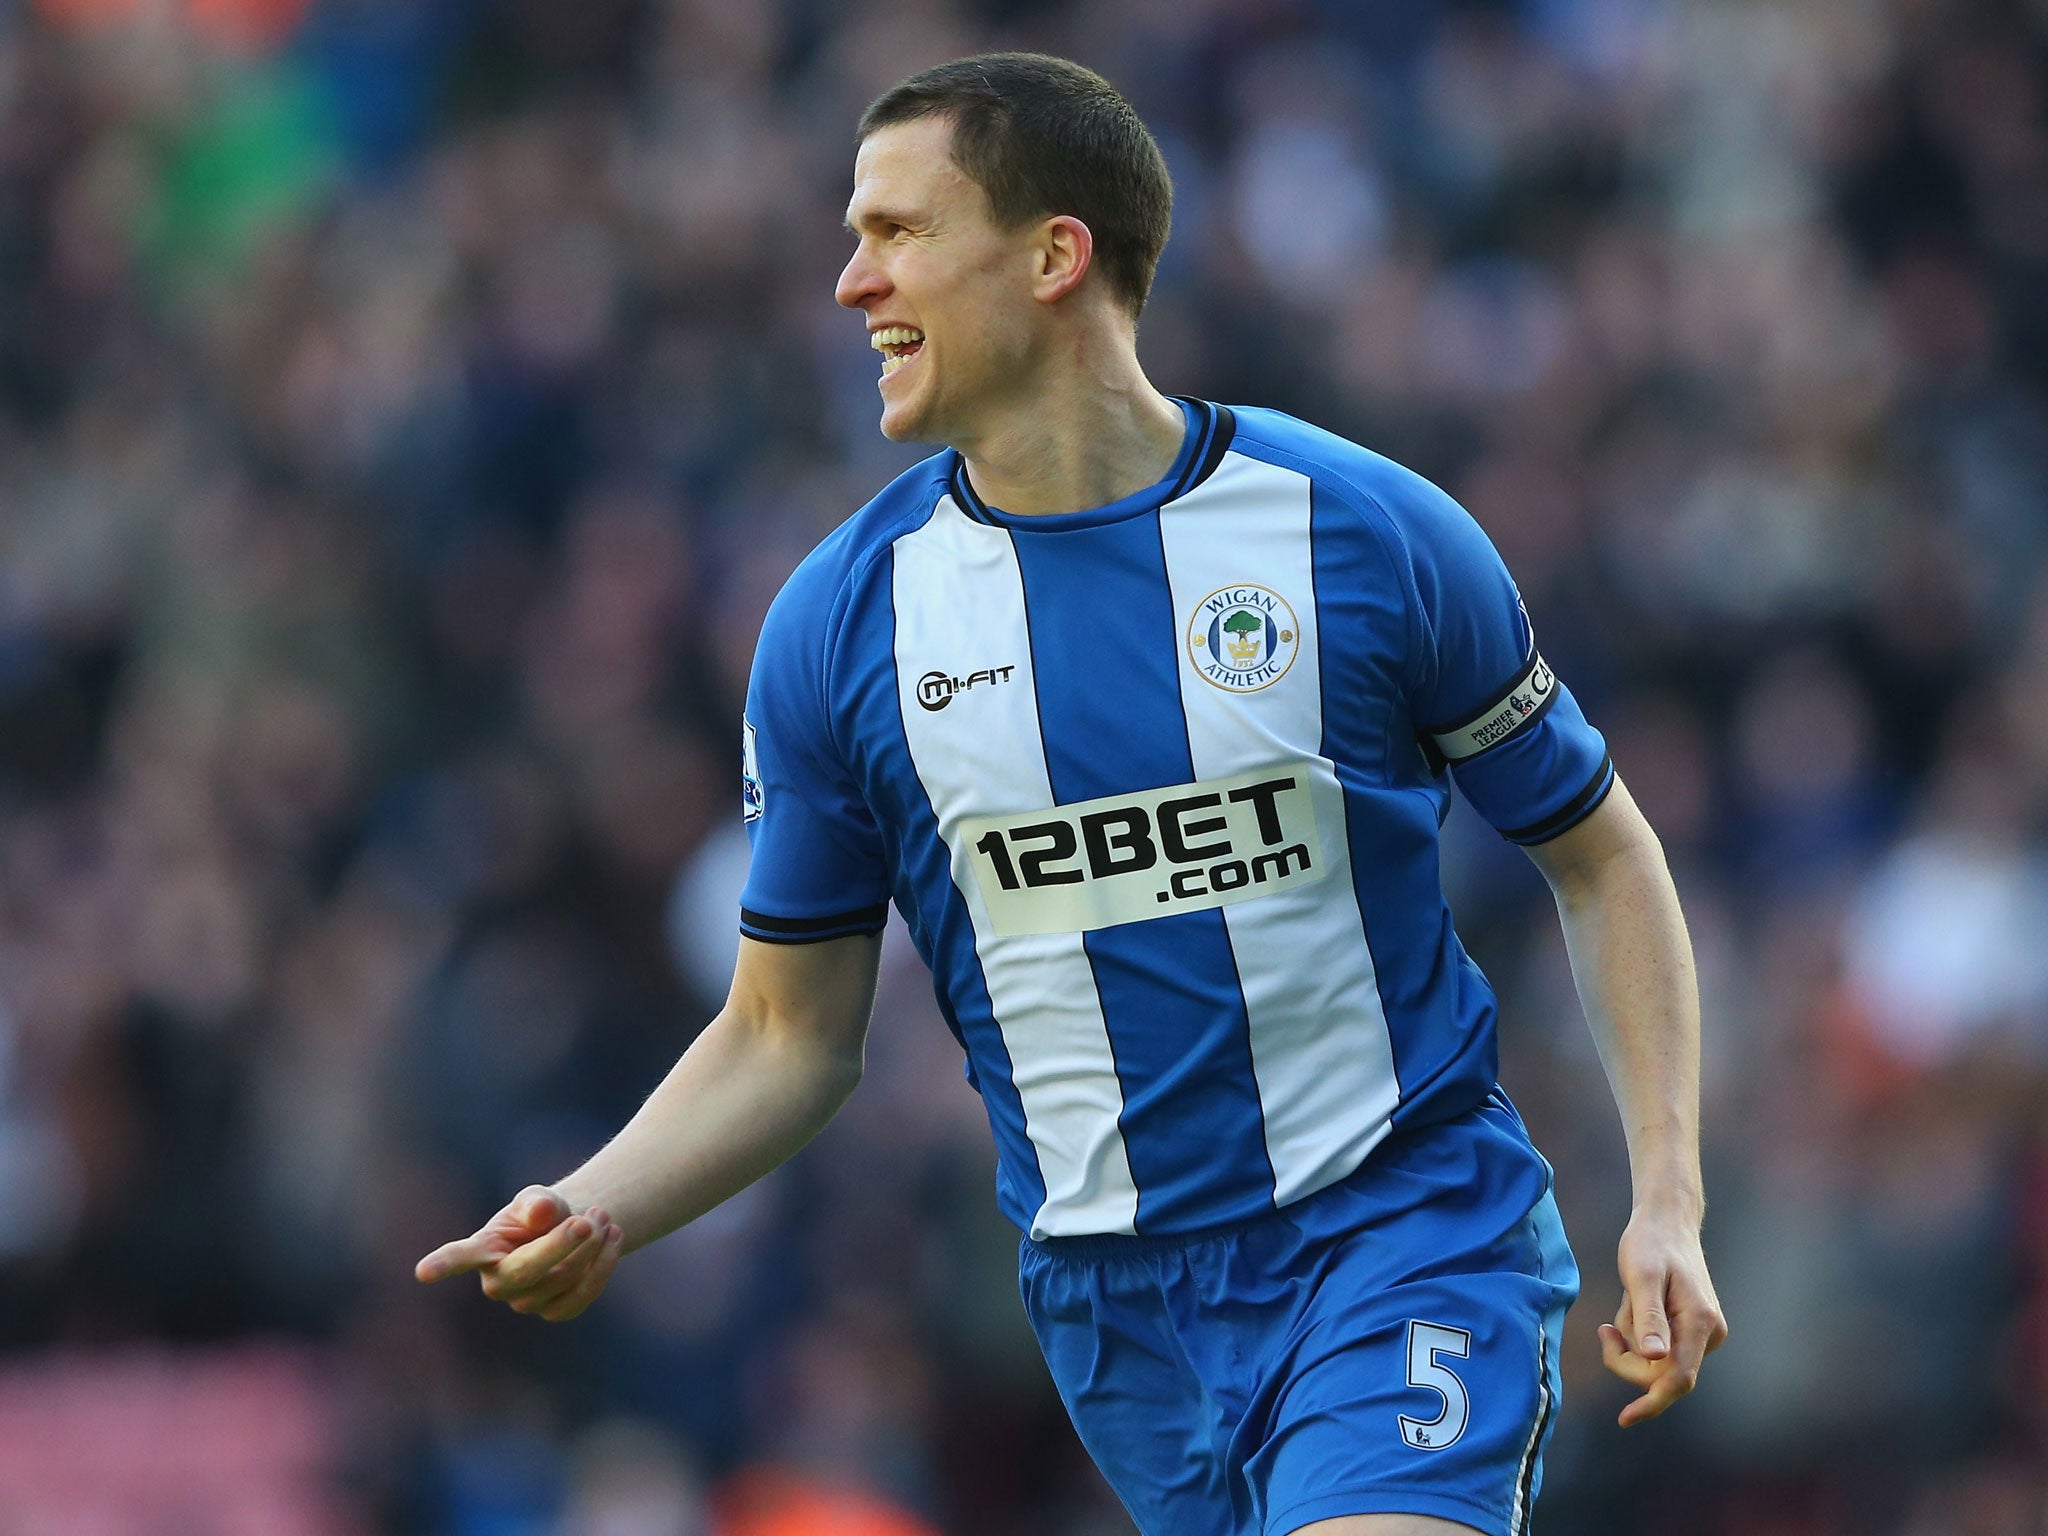 Gary Caldwell of Wigan Athletic celebrates after scoring the opening goal